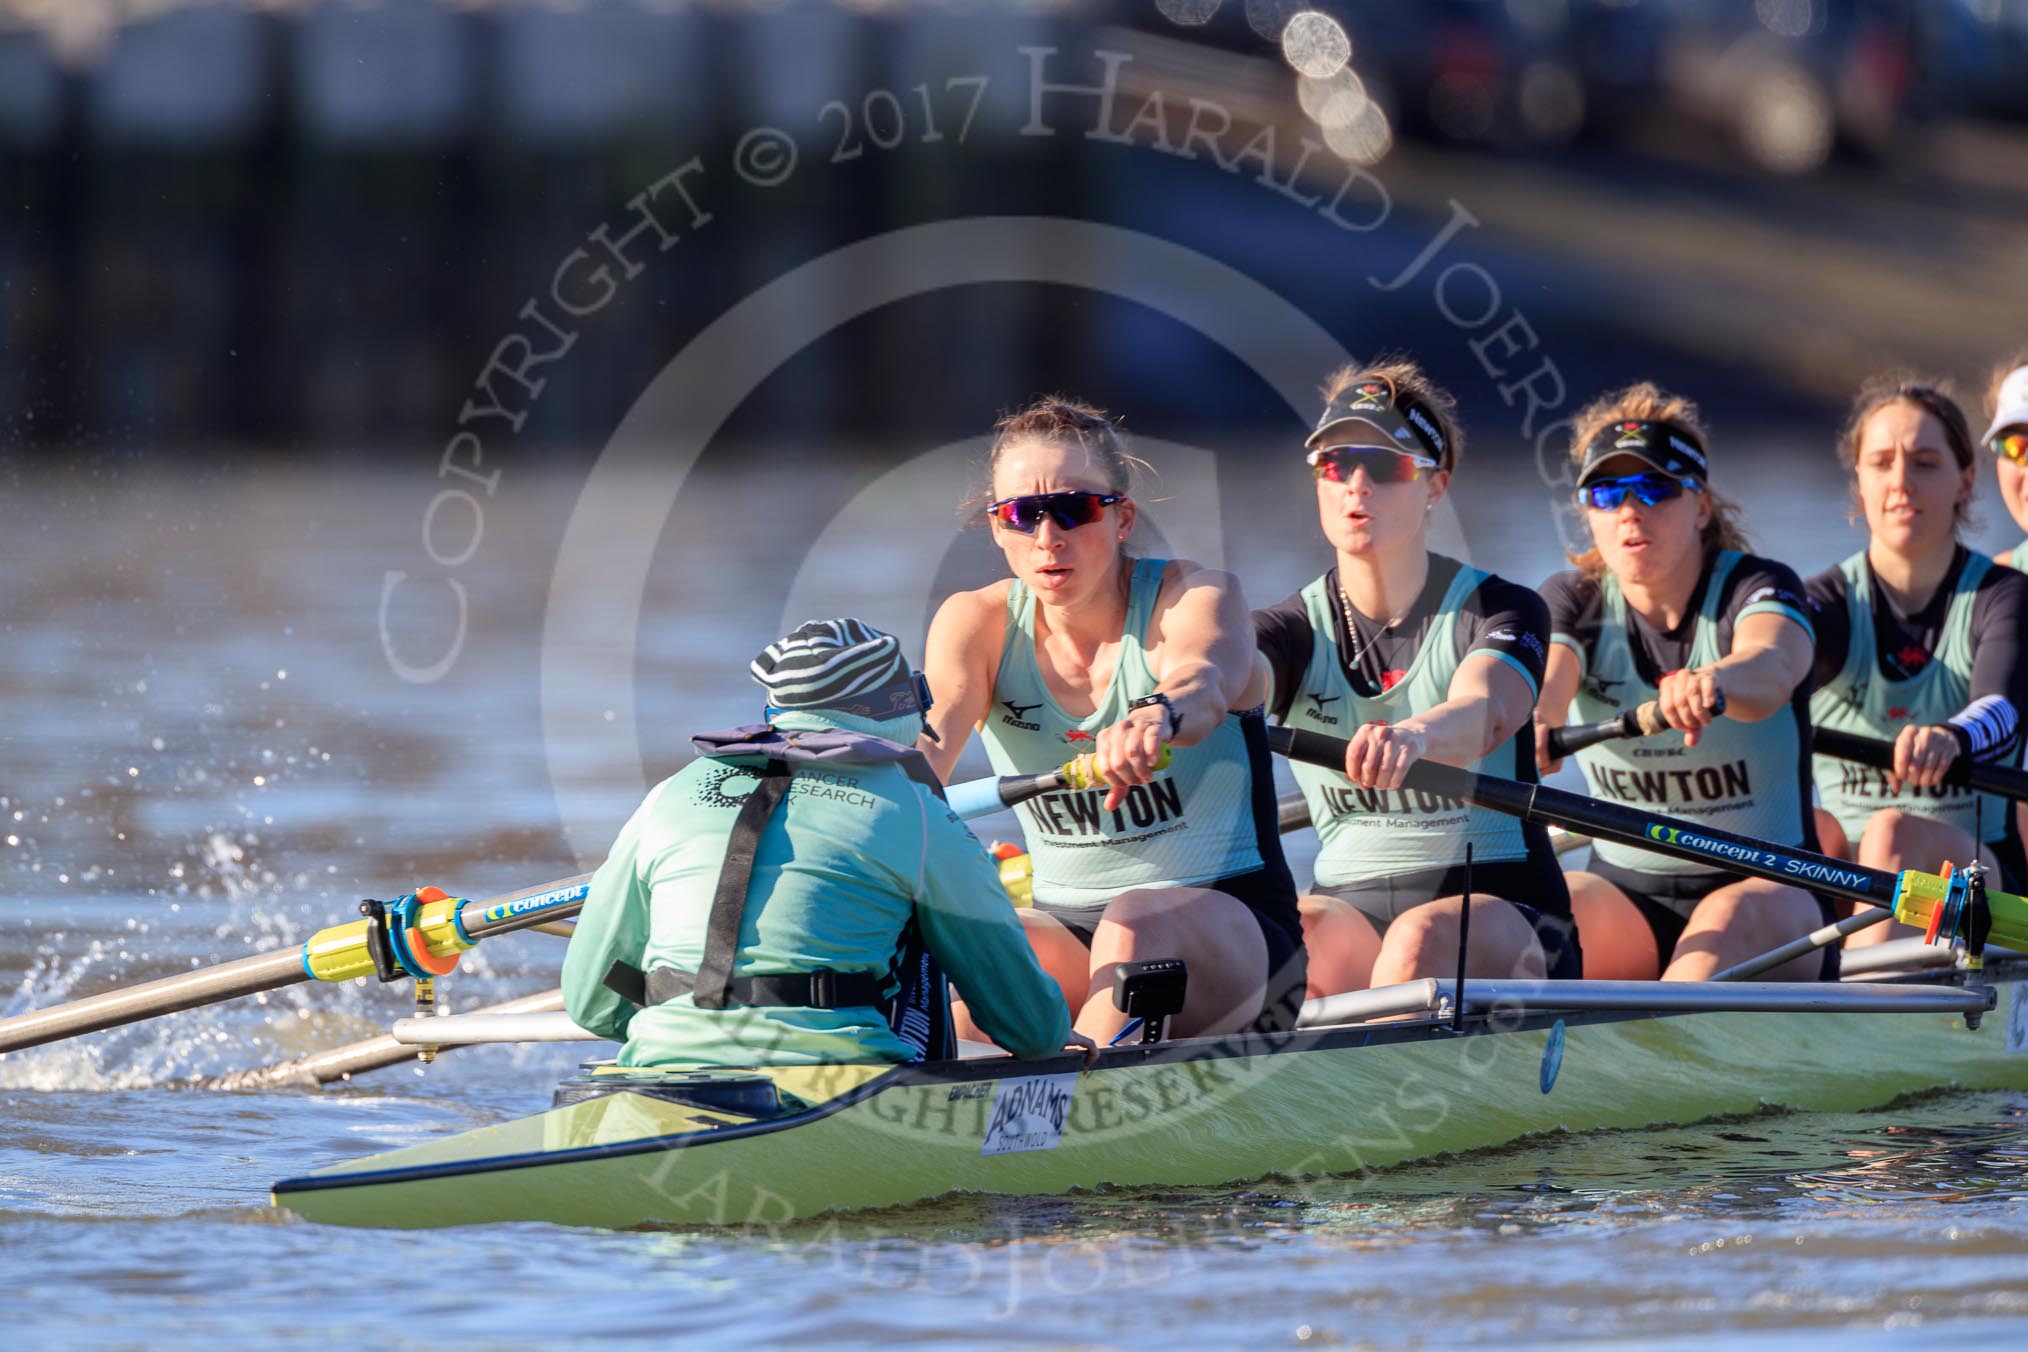 The Women's Boat Race season 2018 - fixture CUWBC vs. ULBC: The race has been started - CUWBC with ox Sophie Shapter, stroke Tricia Smith, 7 Imogen Grant, 6 Anne Beenken, 5 Thea Zabell, 4 Paula Wesselmann.
River Thames between Putney Bridge and Mortlake,
London SW15,

United Kingdom,
on 17 February 2018 at 13:09, image #40